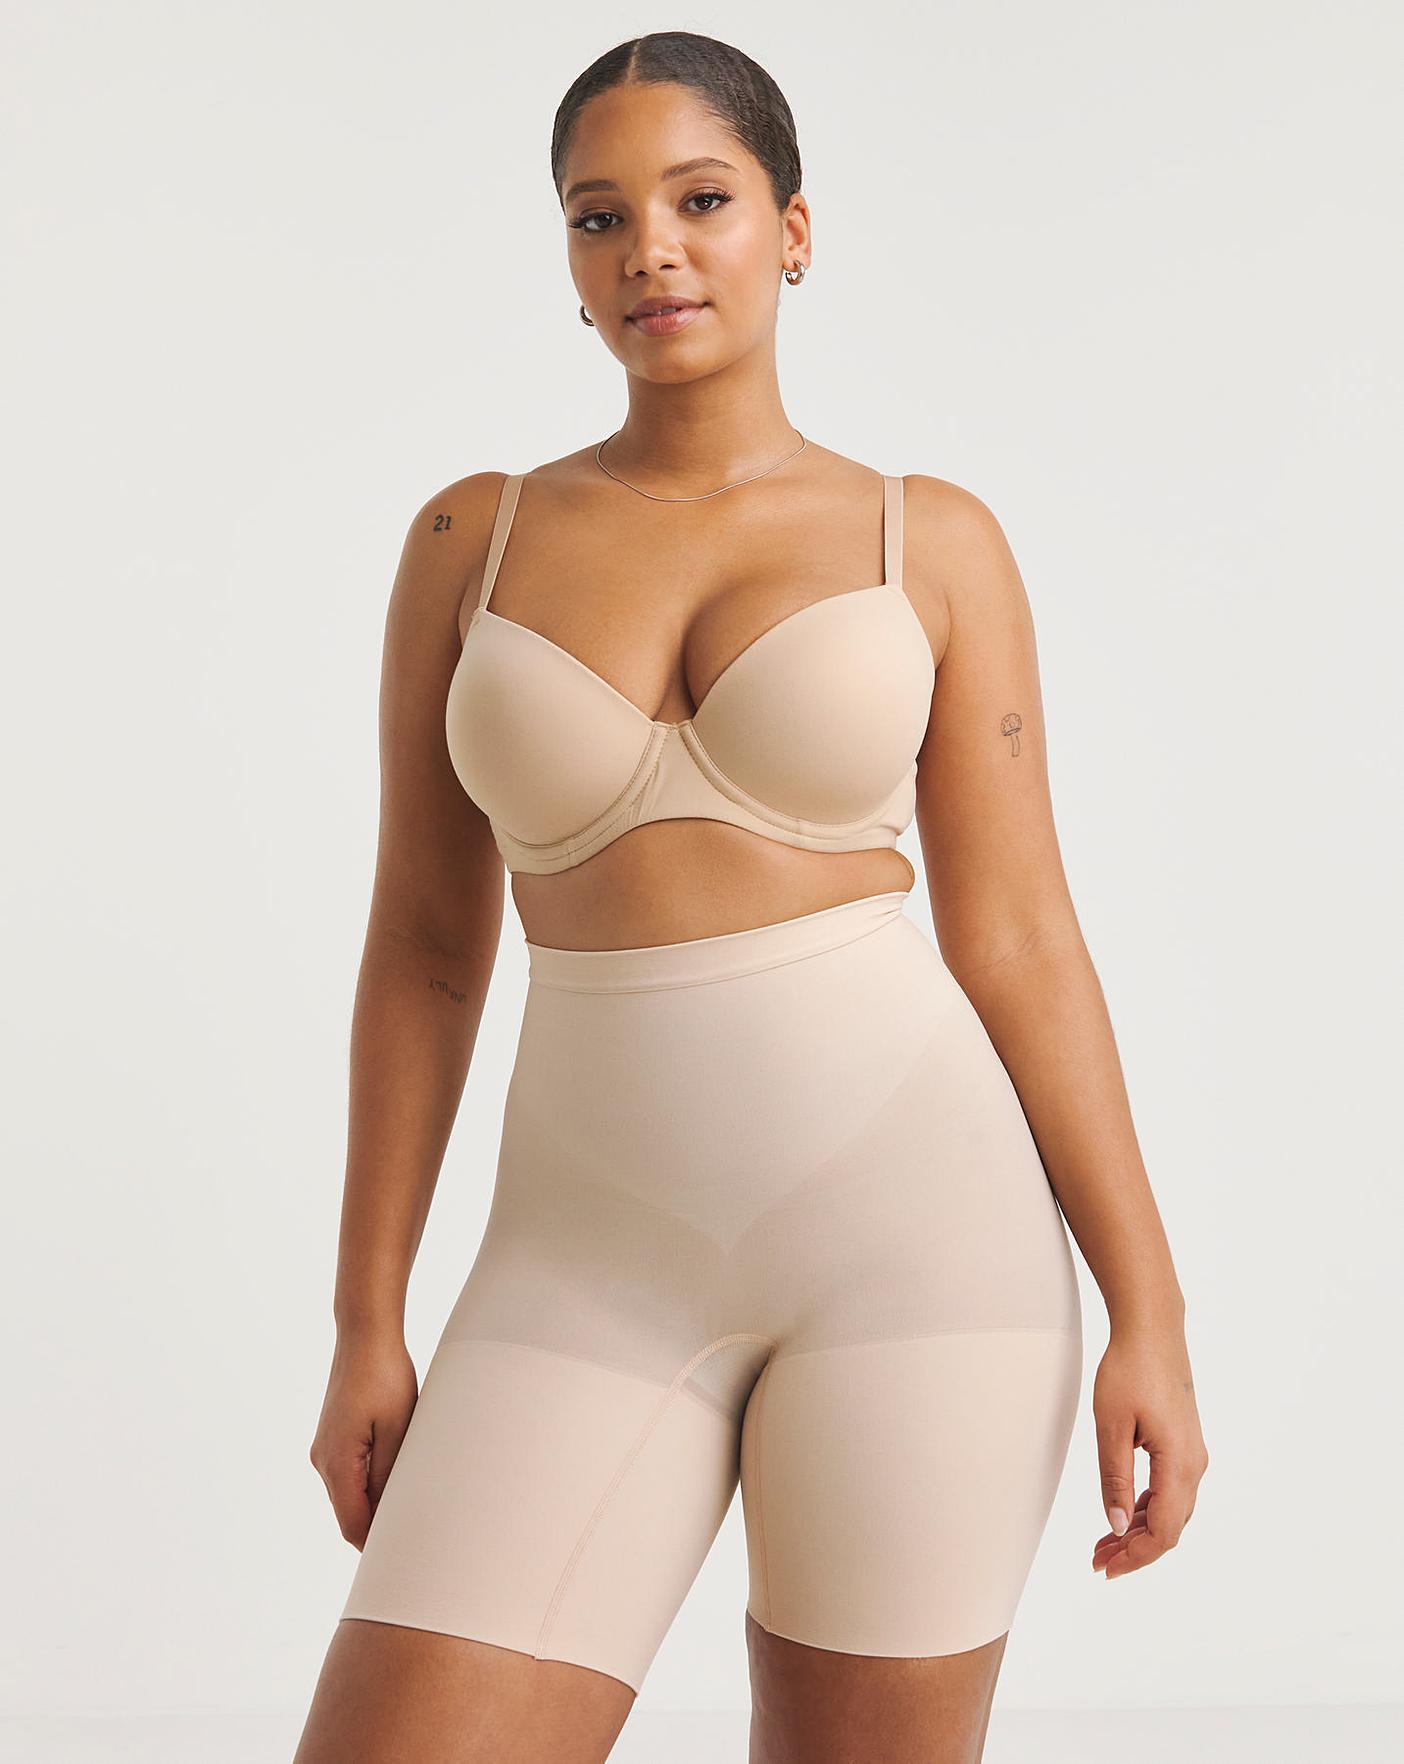 SPANX Everyday Shaping Brief Plus Size 